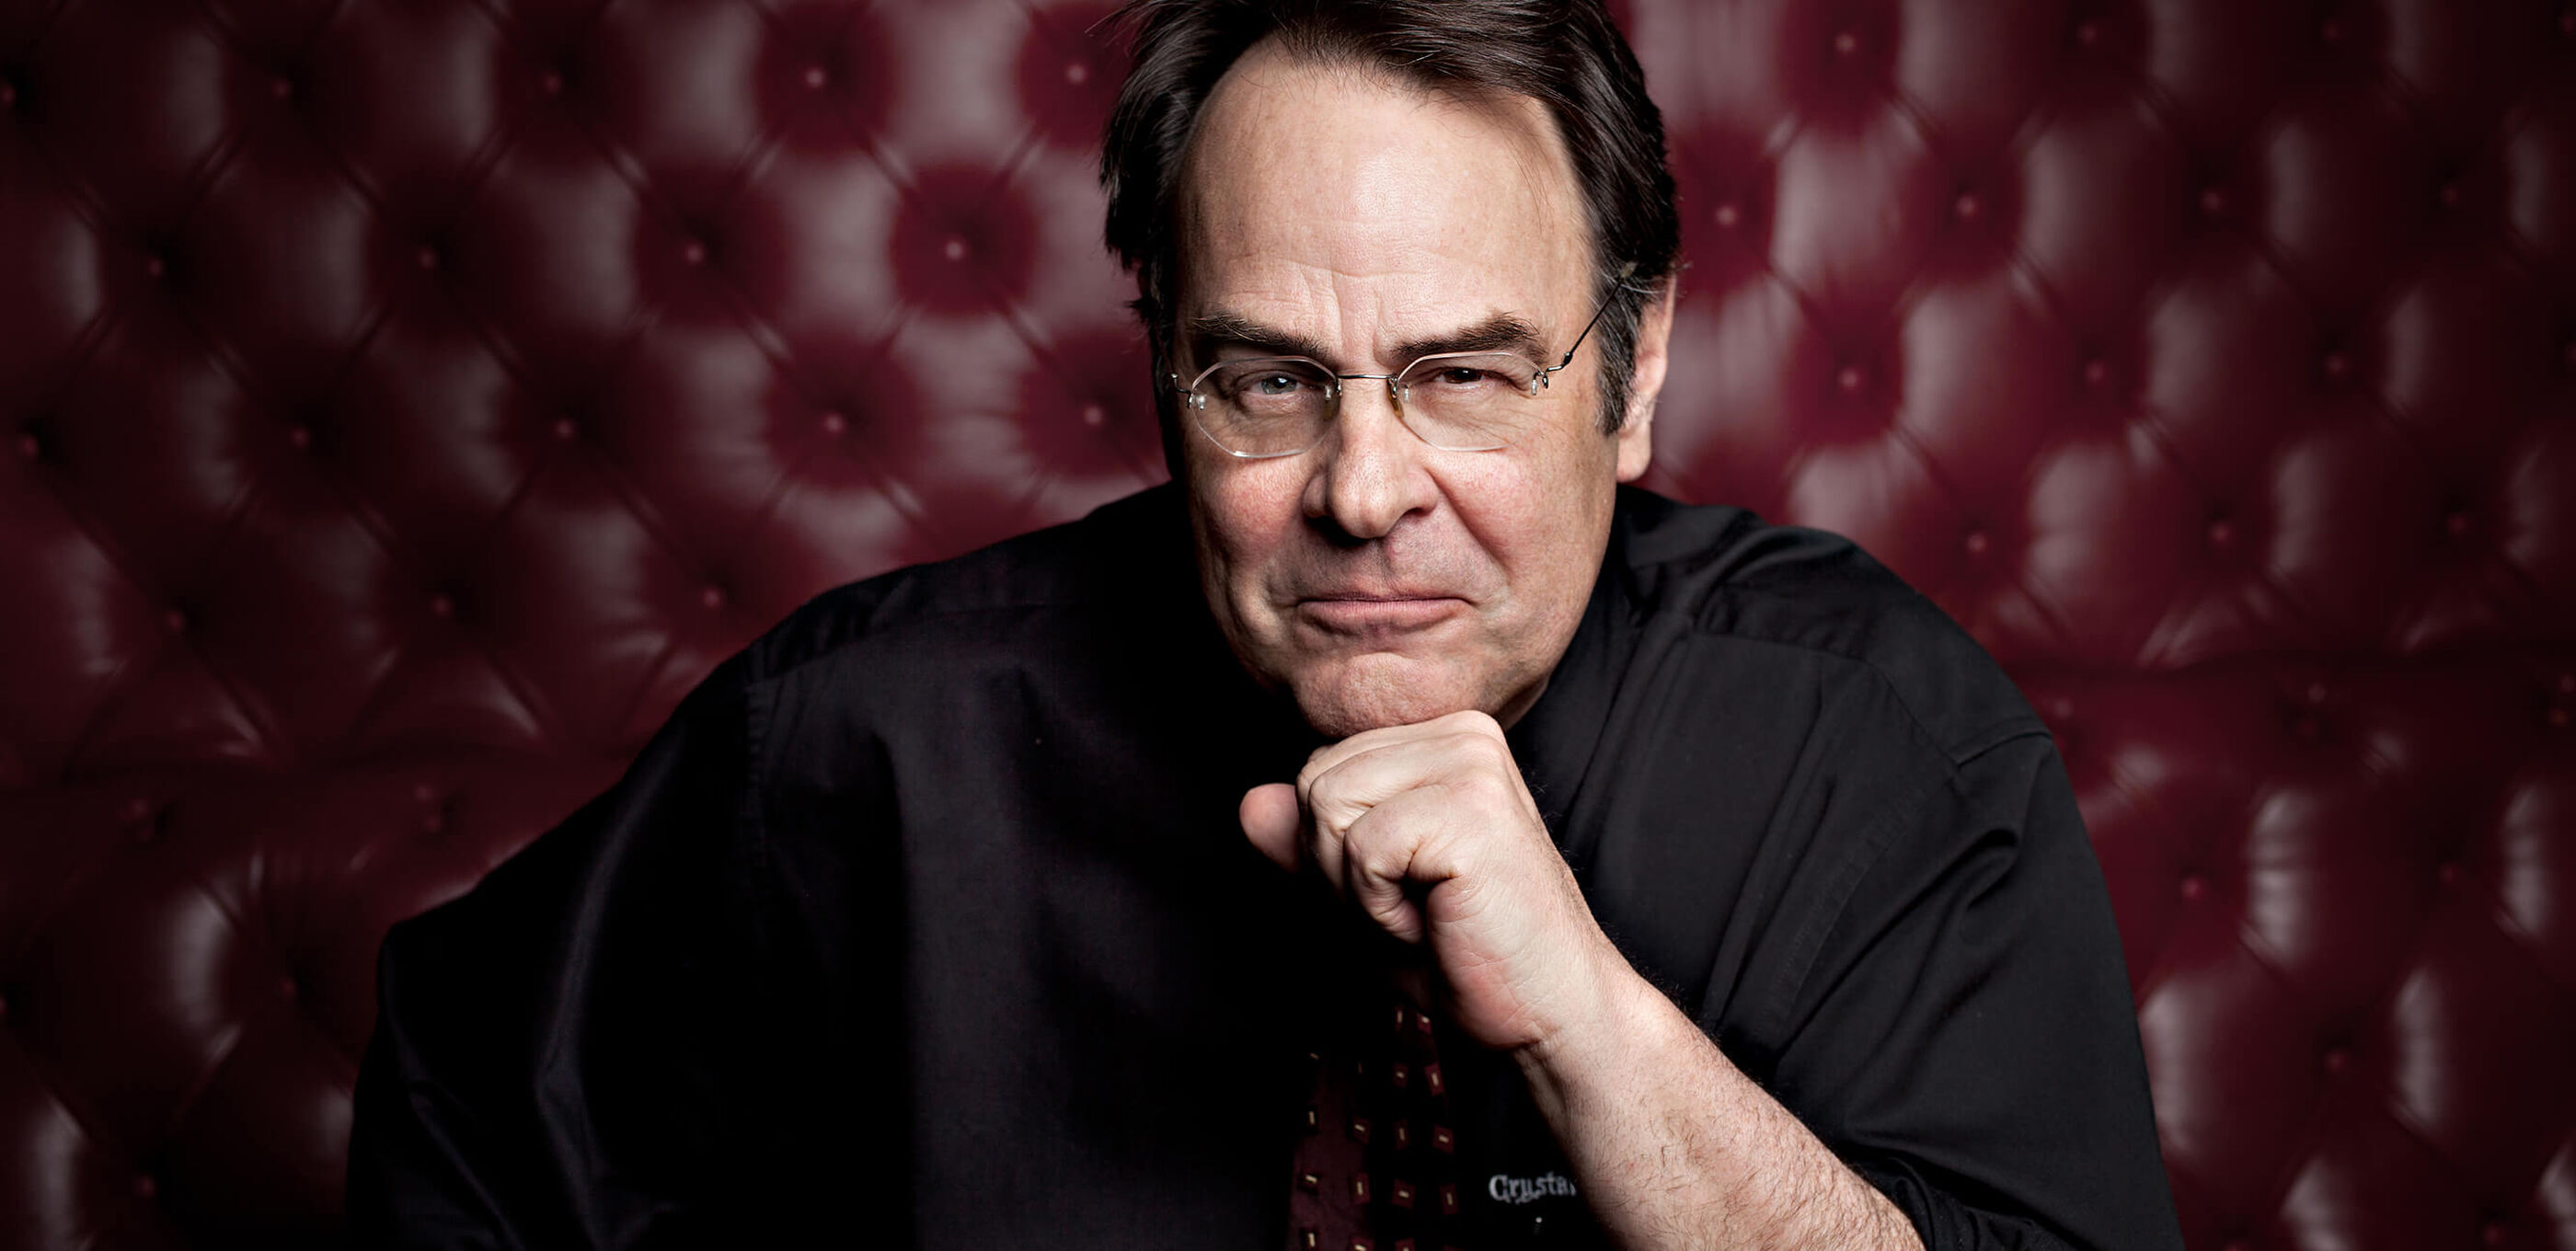 Dan Aykroyd poses for a headshot in a burgundy leather booth